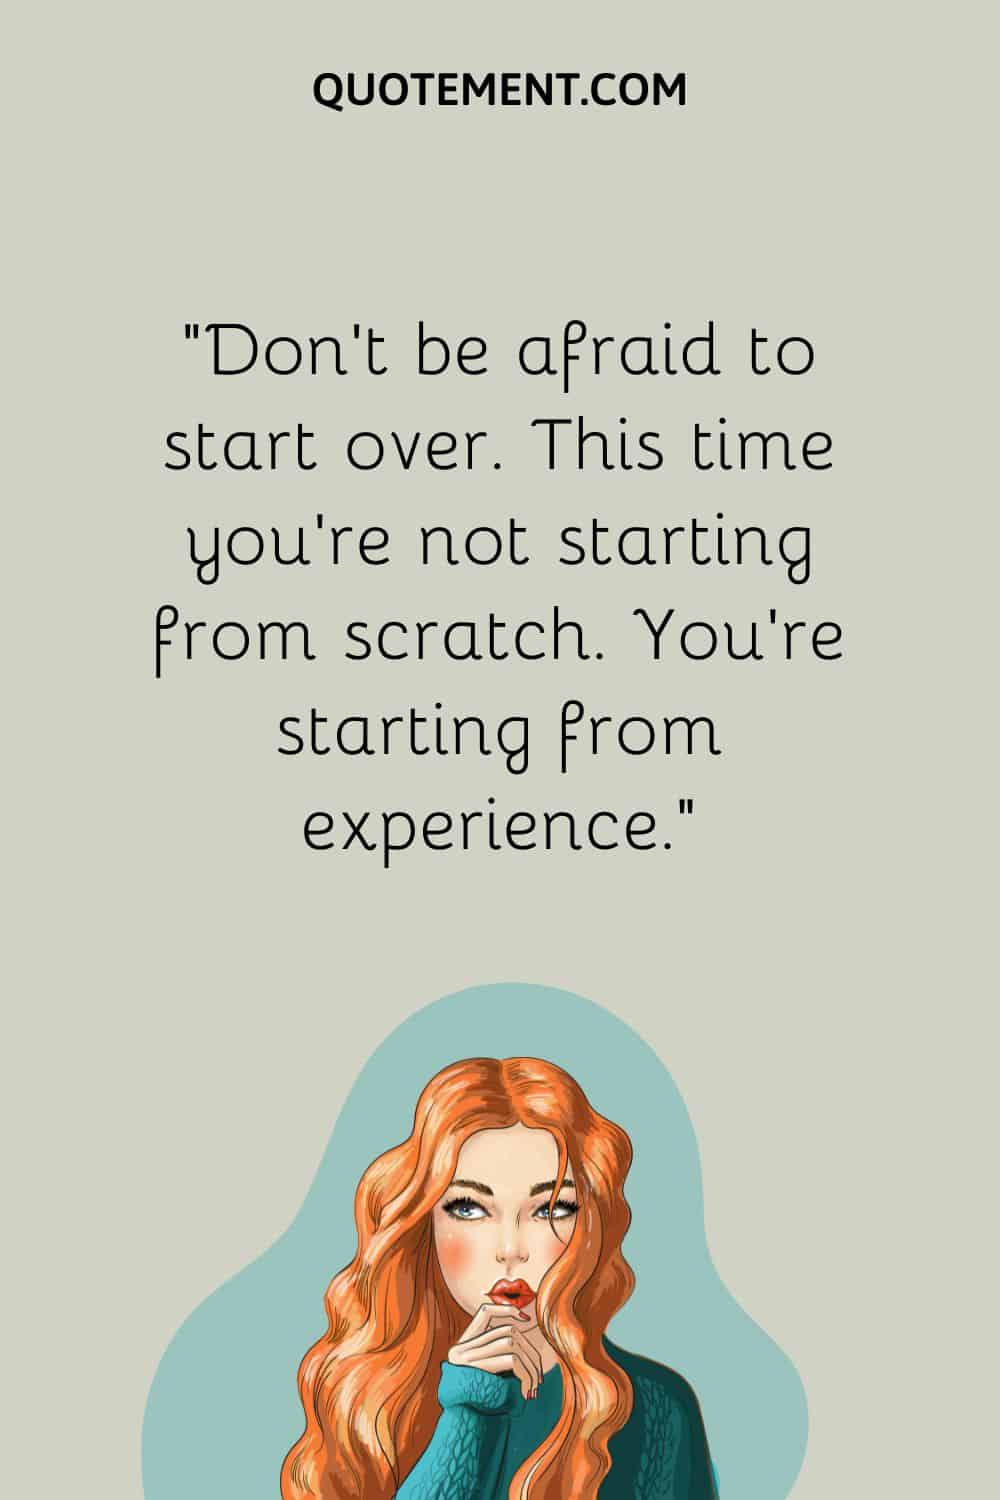 Don’t be afraid to start over